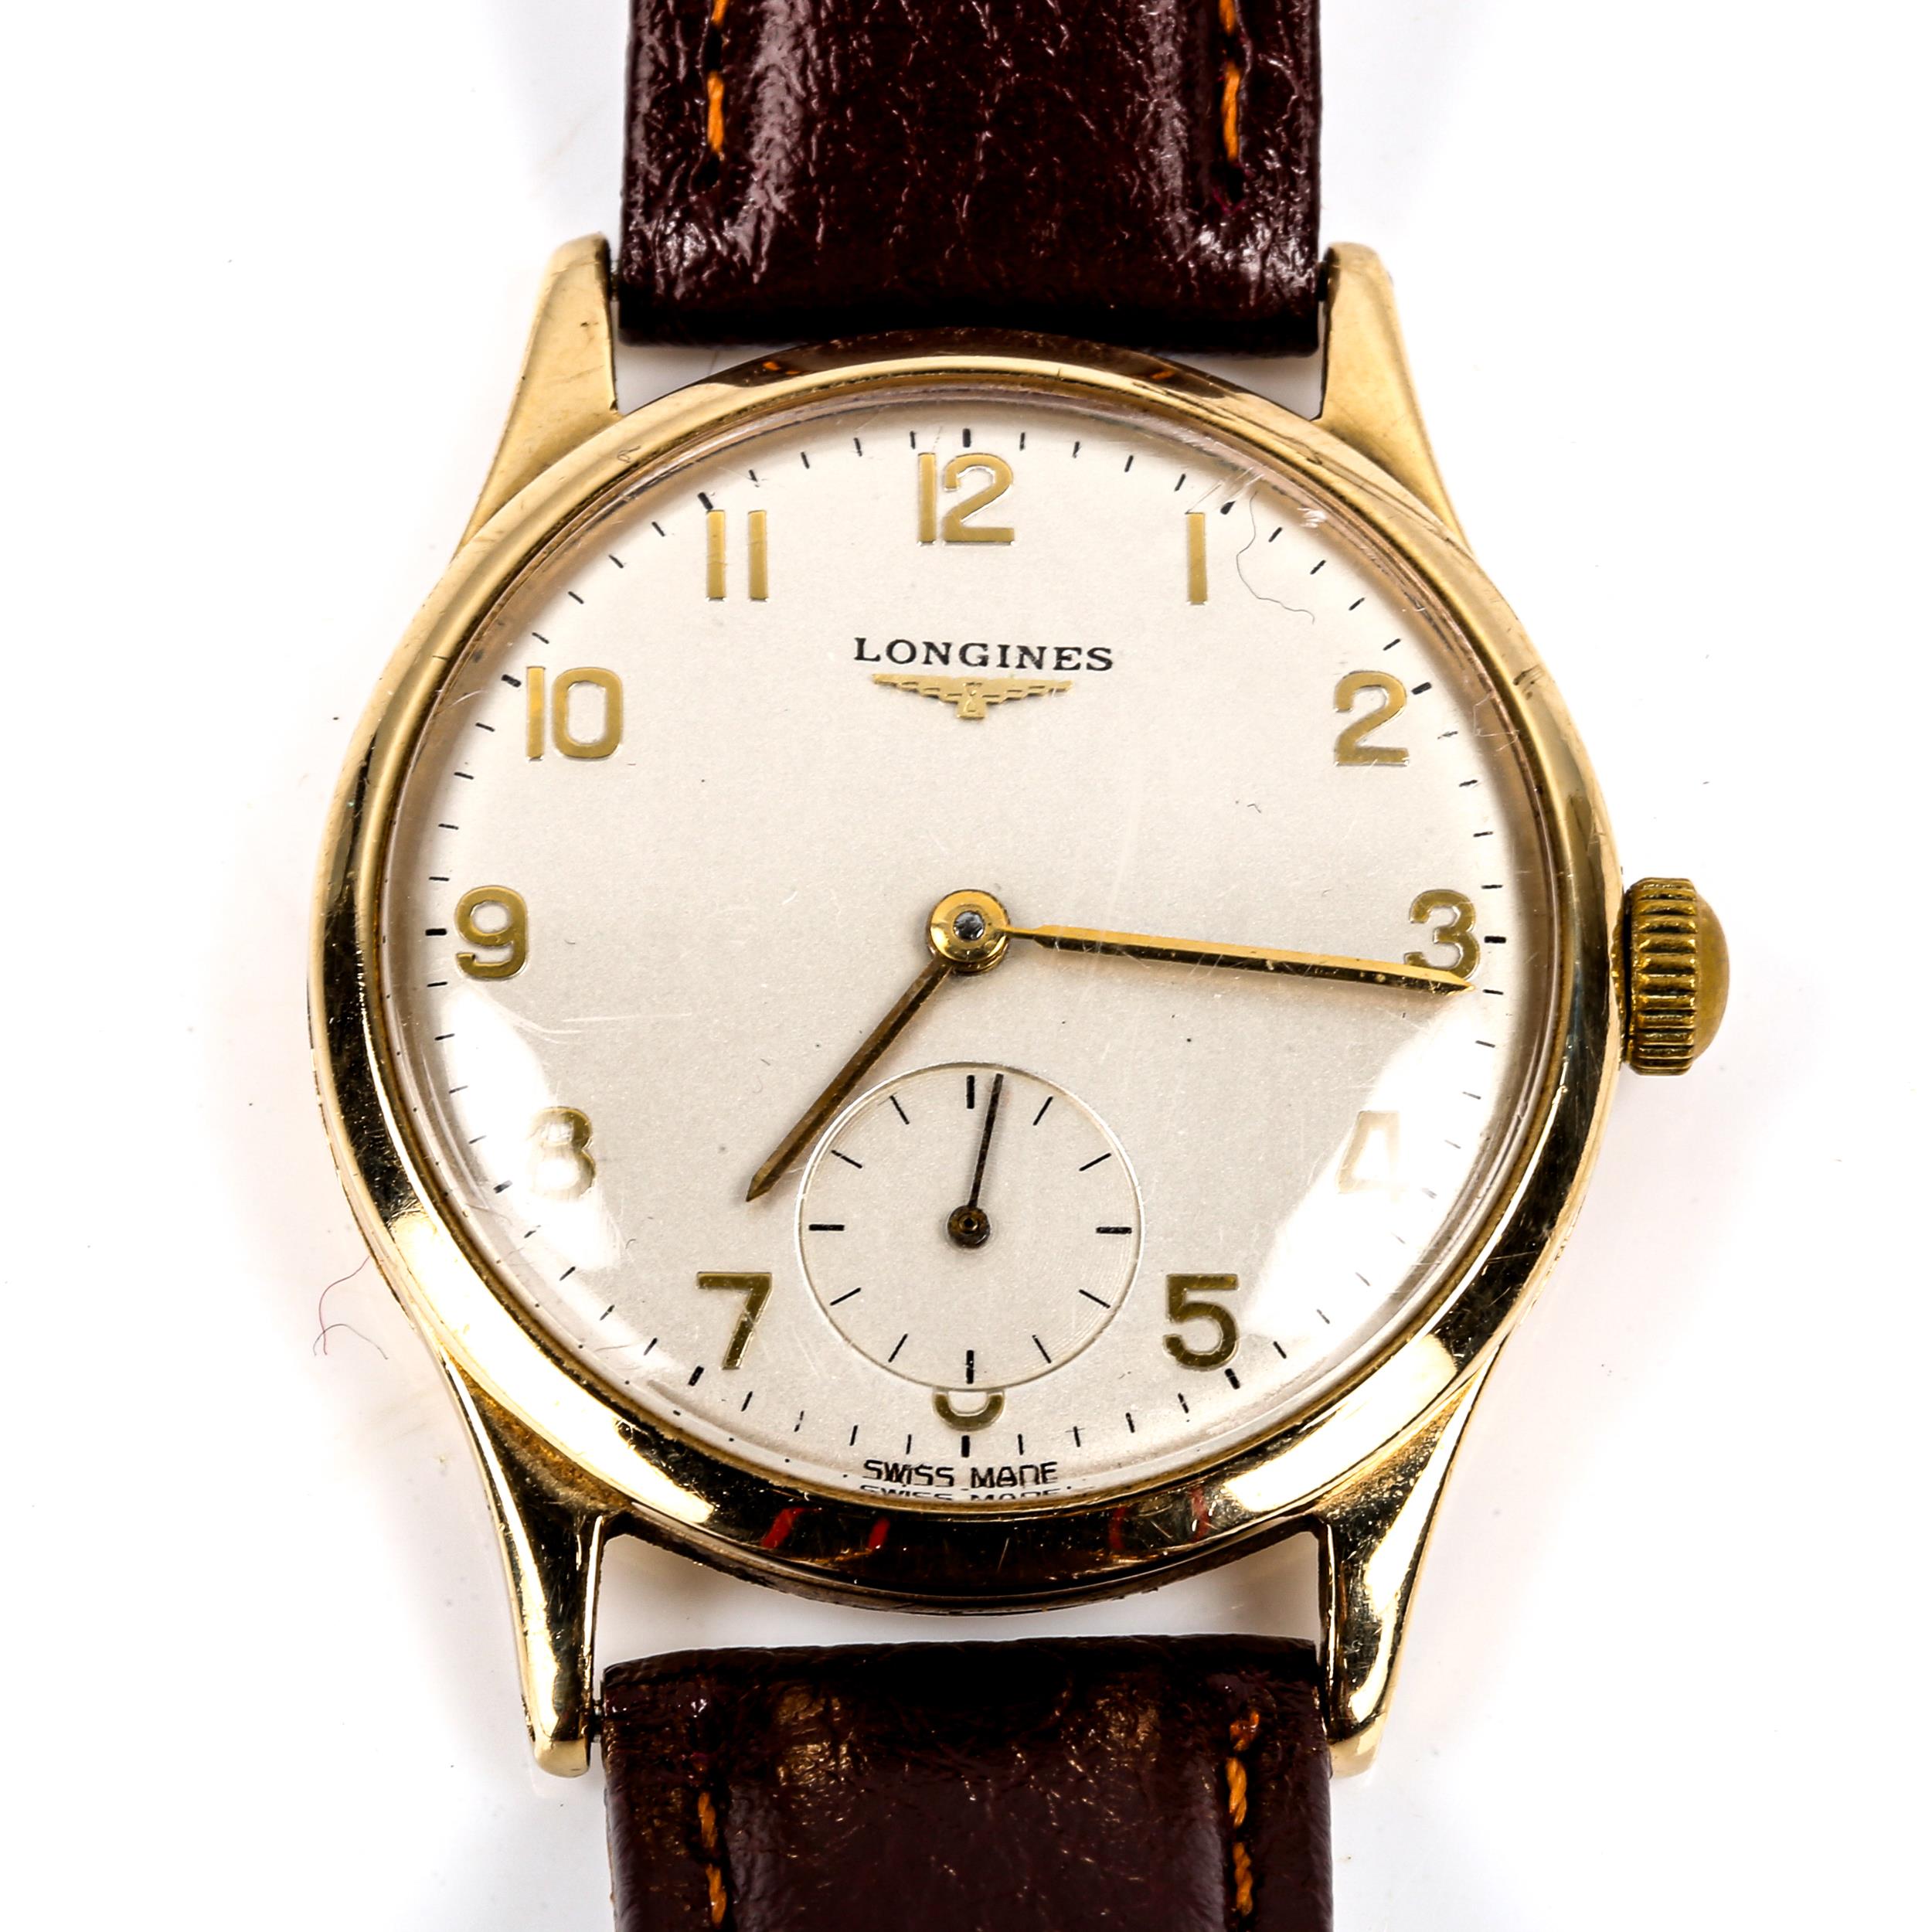 LONGINES - a Vintage 9ct gold mechanical wristwatch, ref. 13322, circa 1964, silvered dial with gilt